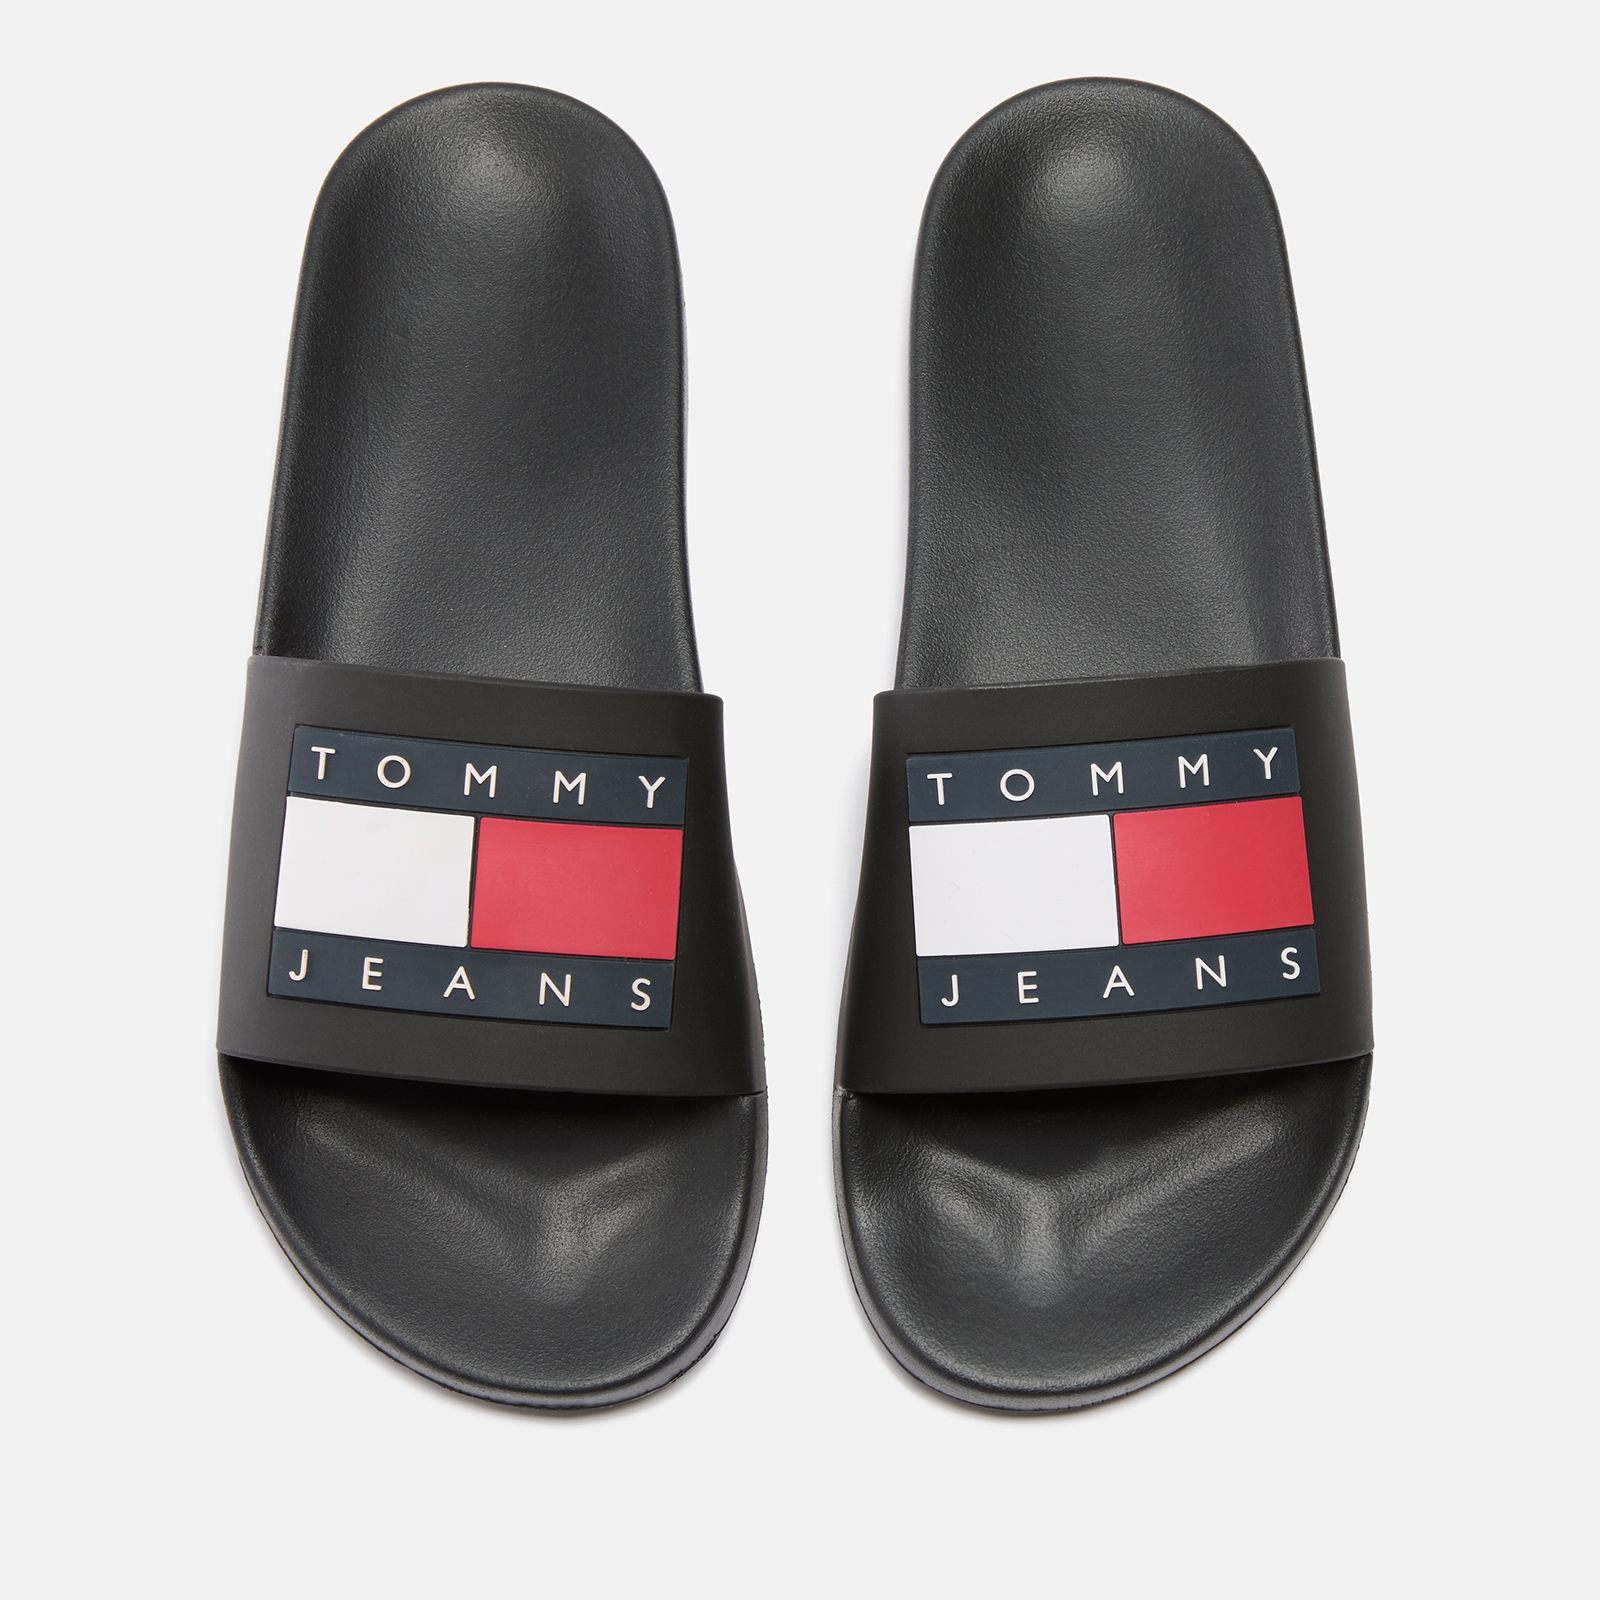 Tommy Jeans Women’s Leather Slider Sandals